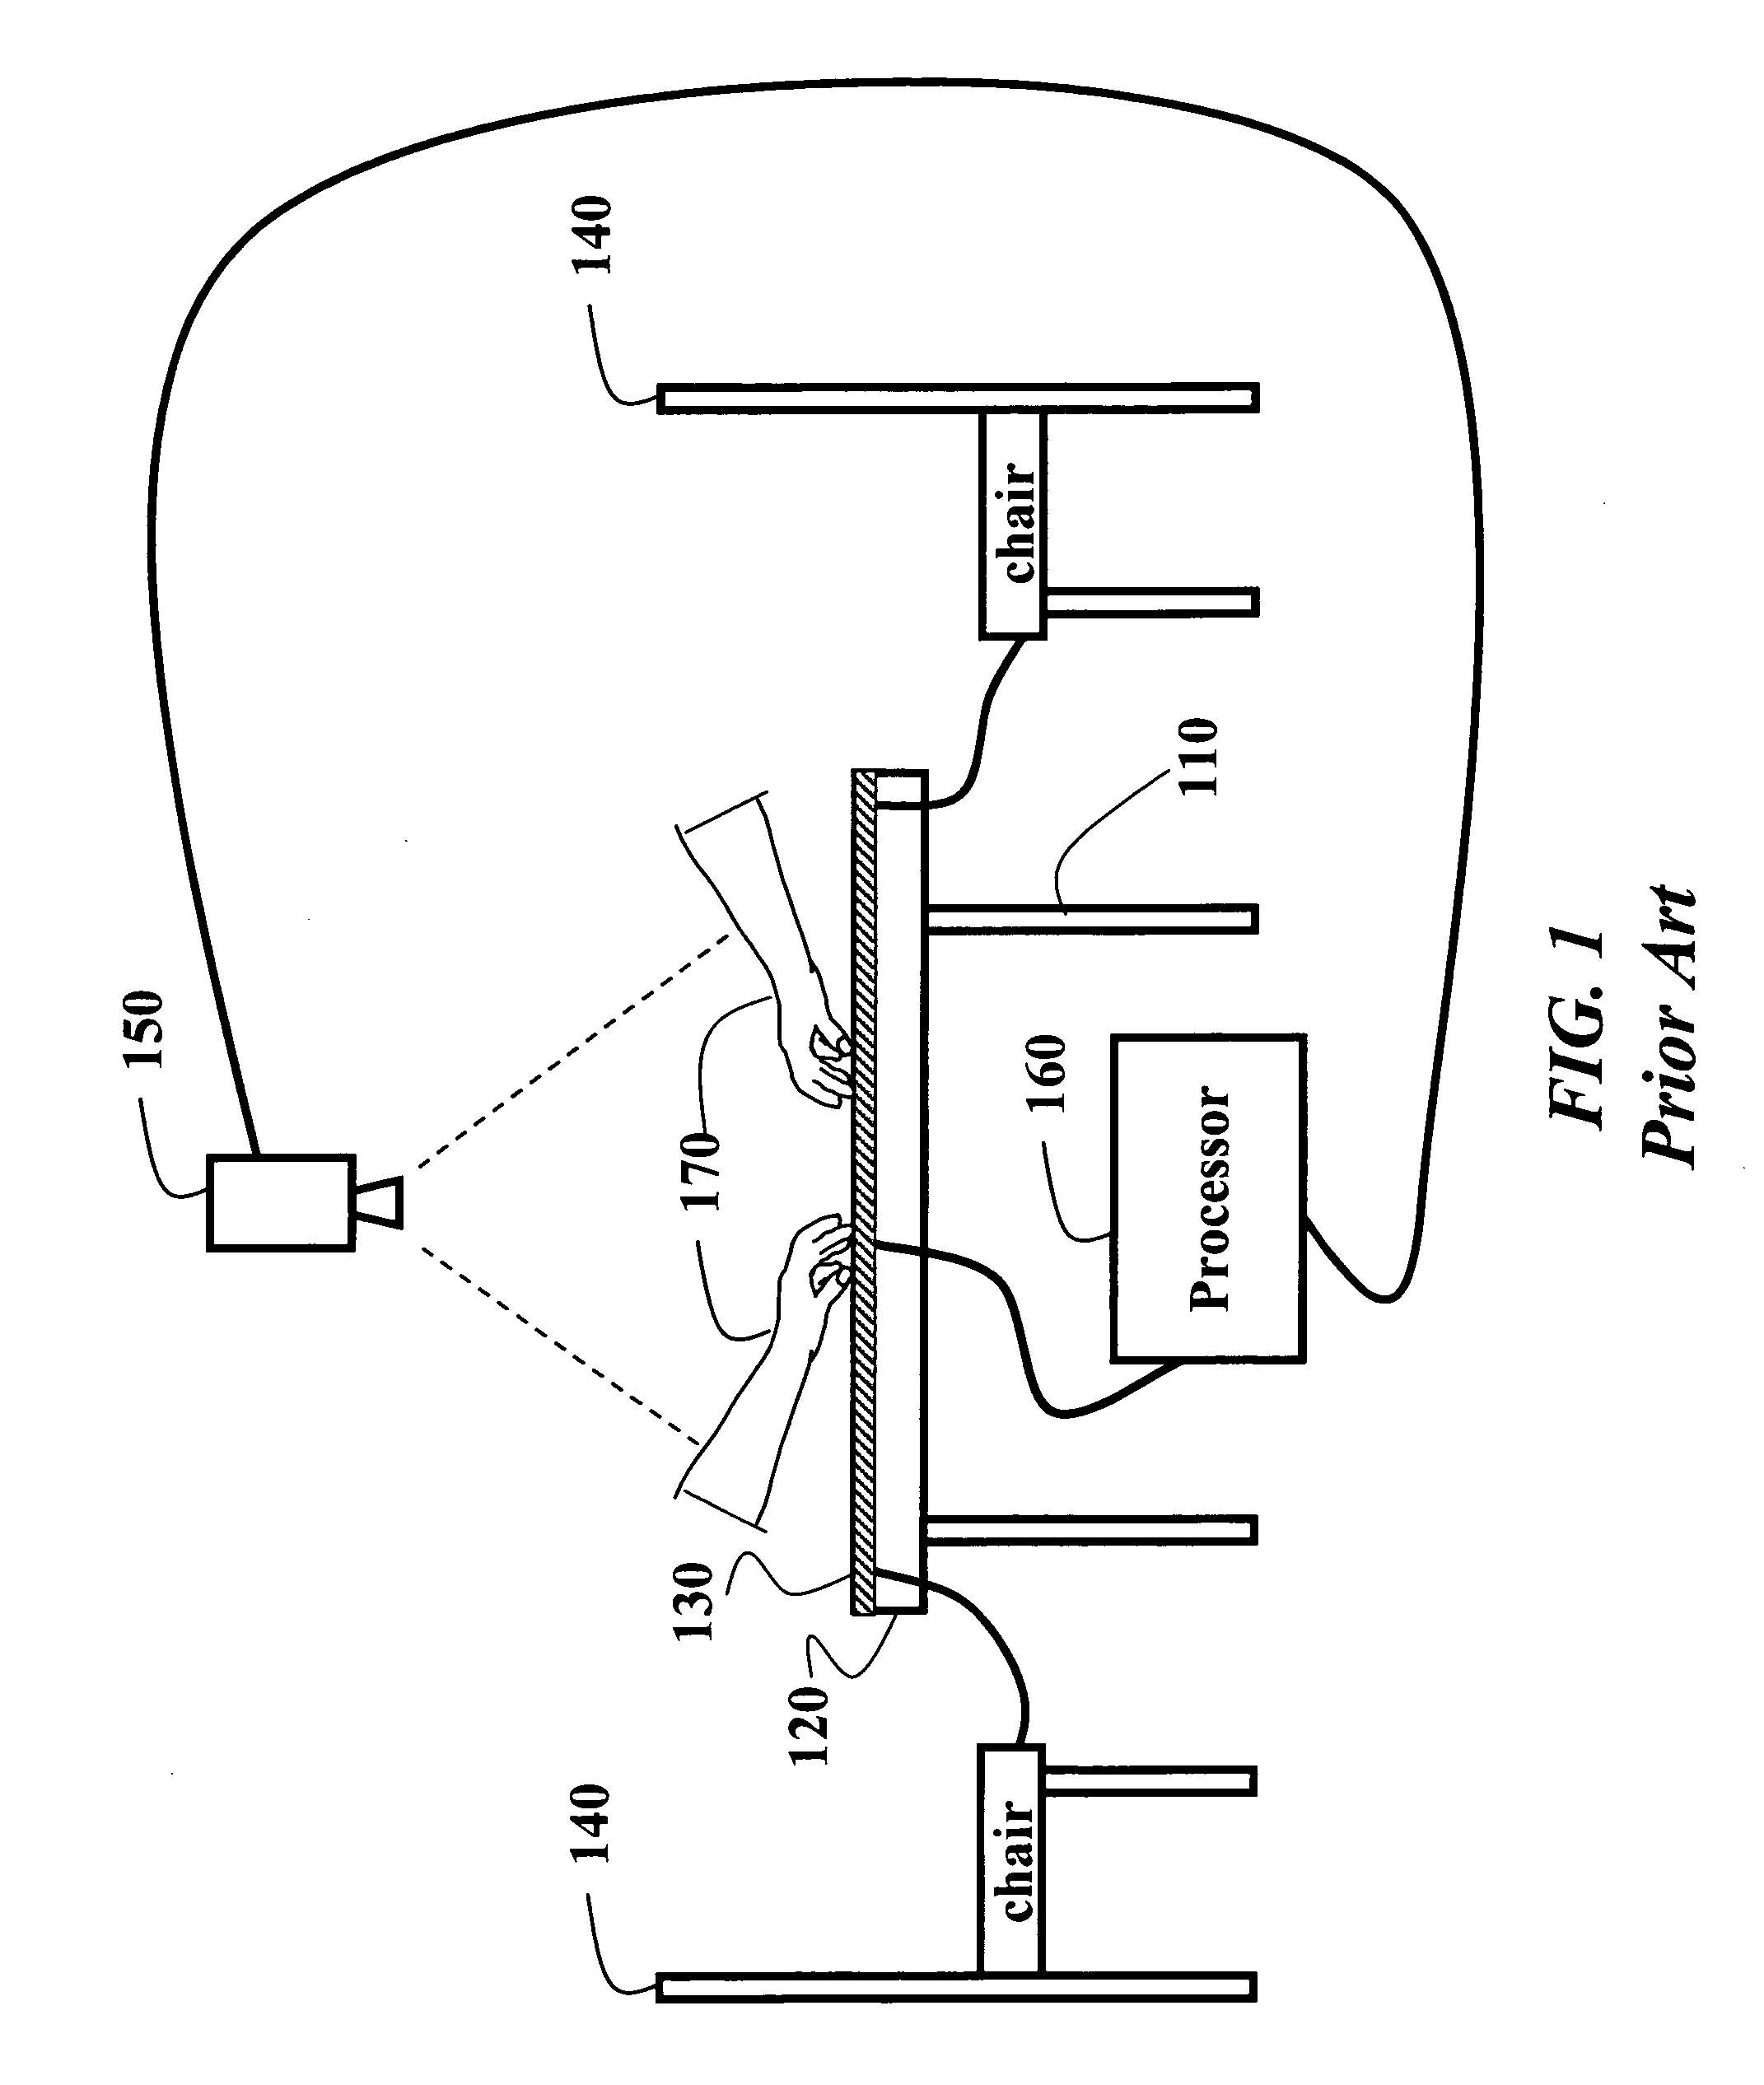 Inverted direct touch sensitive input devices